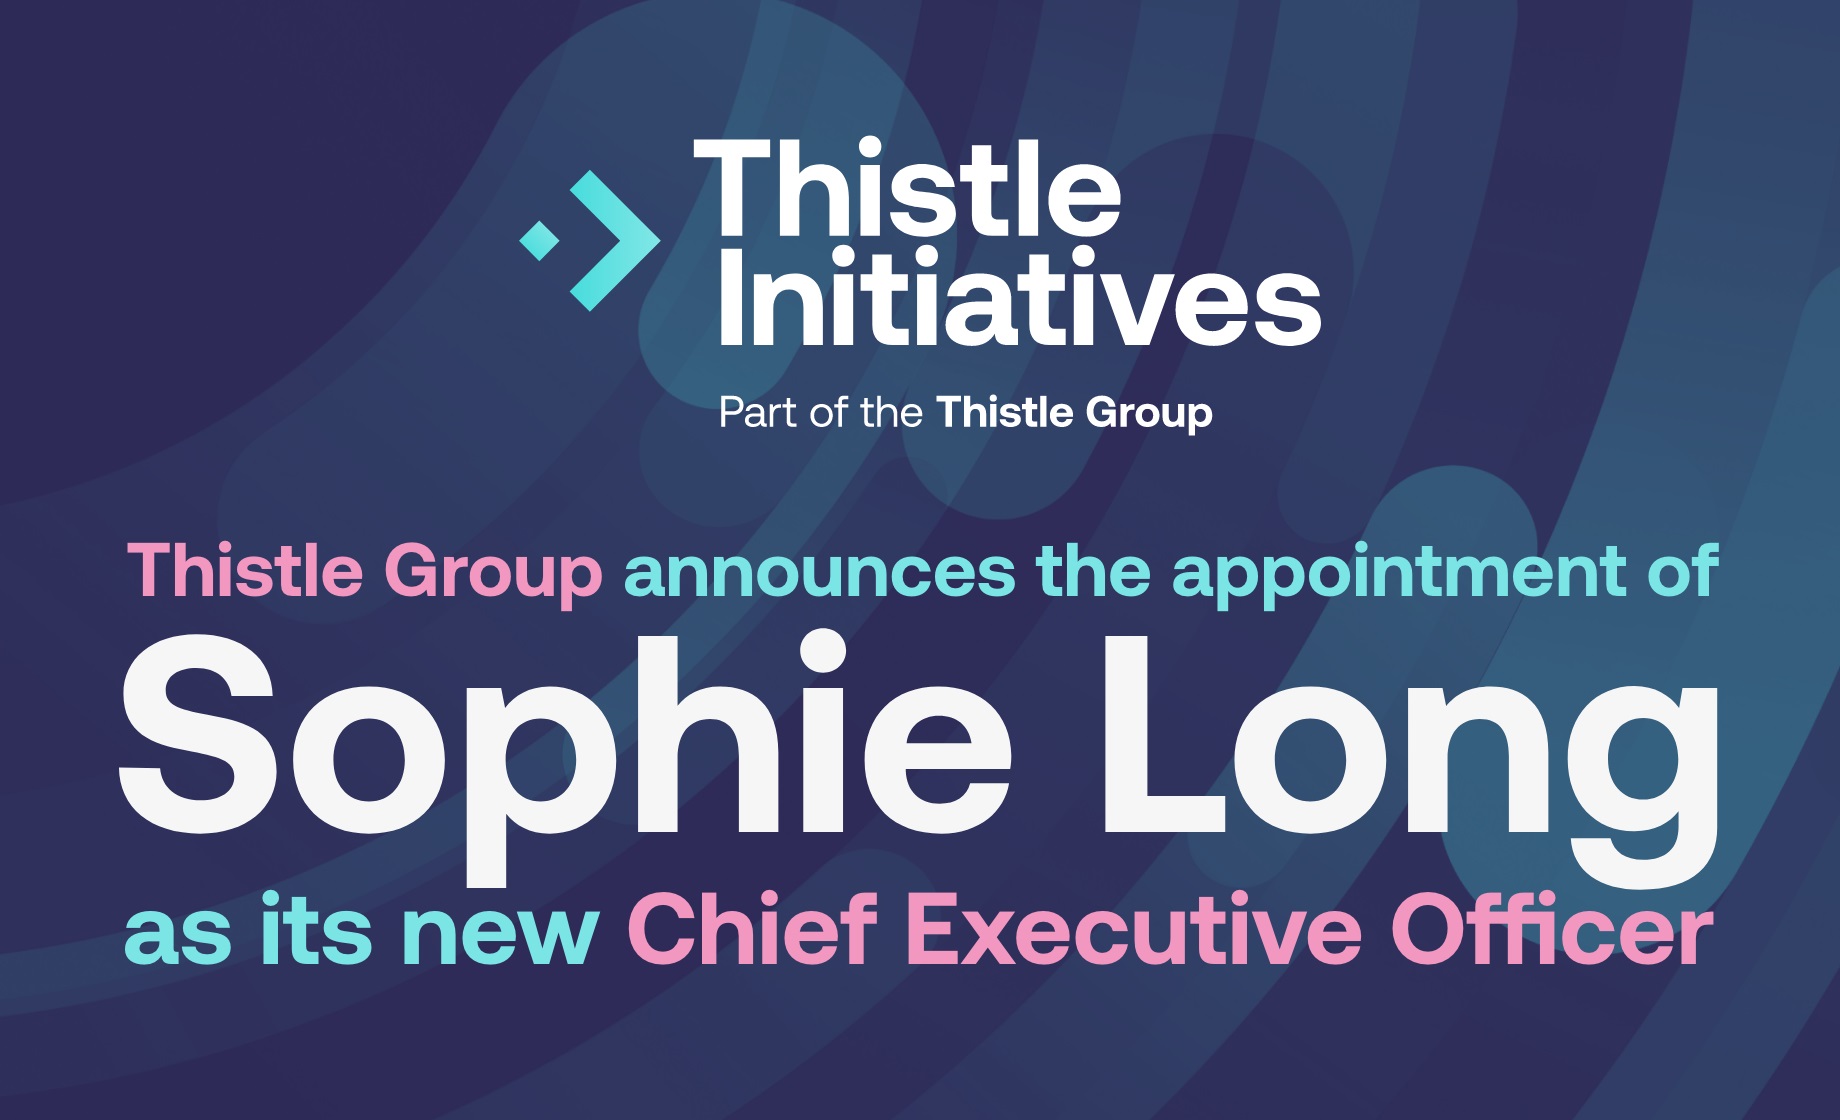 Thistle Group announces the appointment of Sophie Long as its new Chief